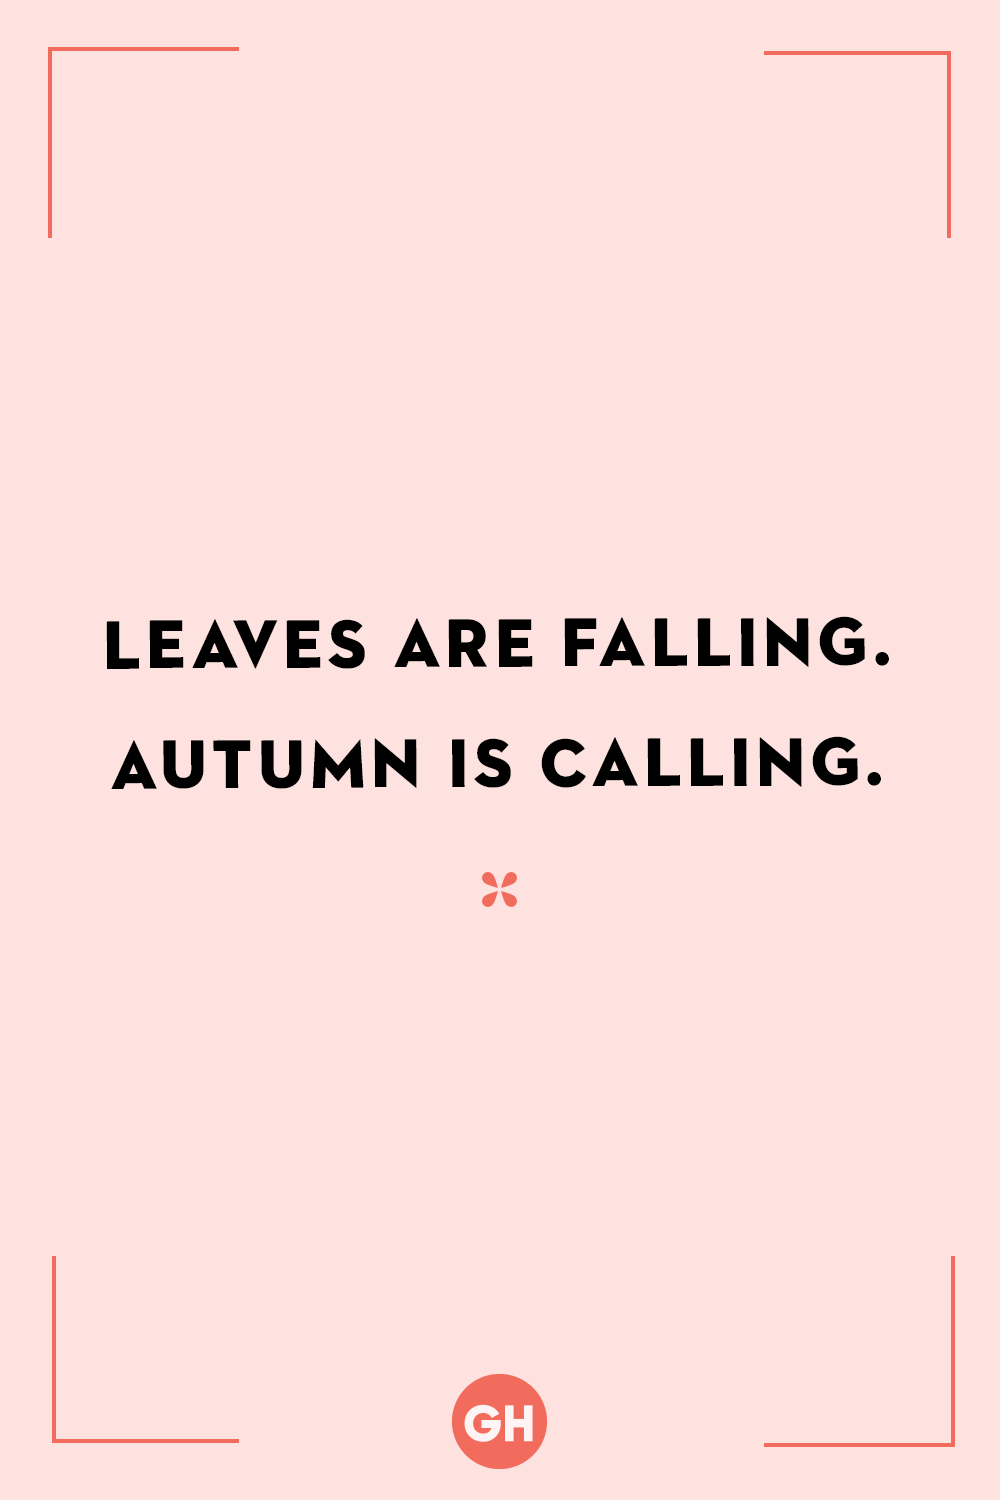 50 Best Fall Quotes Fun Sayings About Autumn